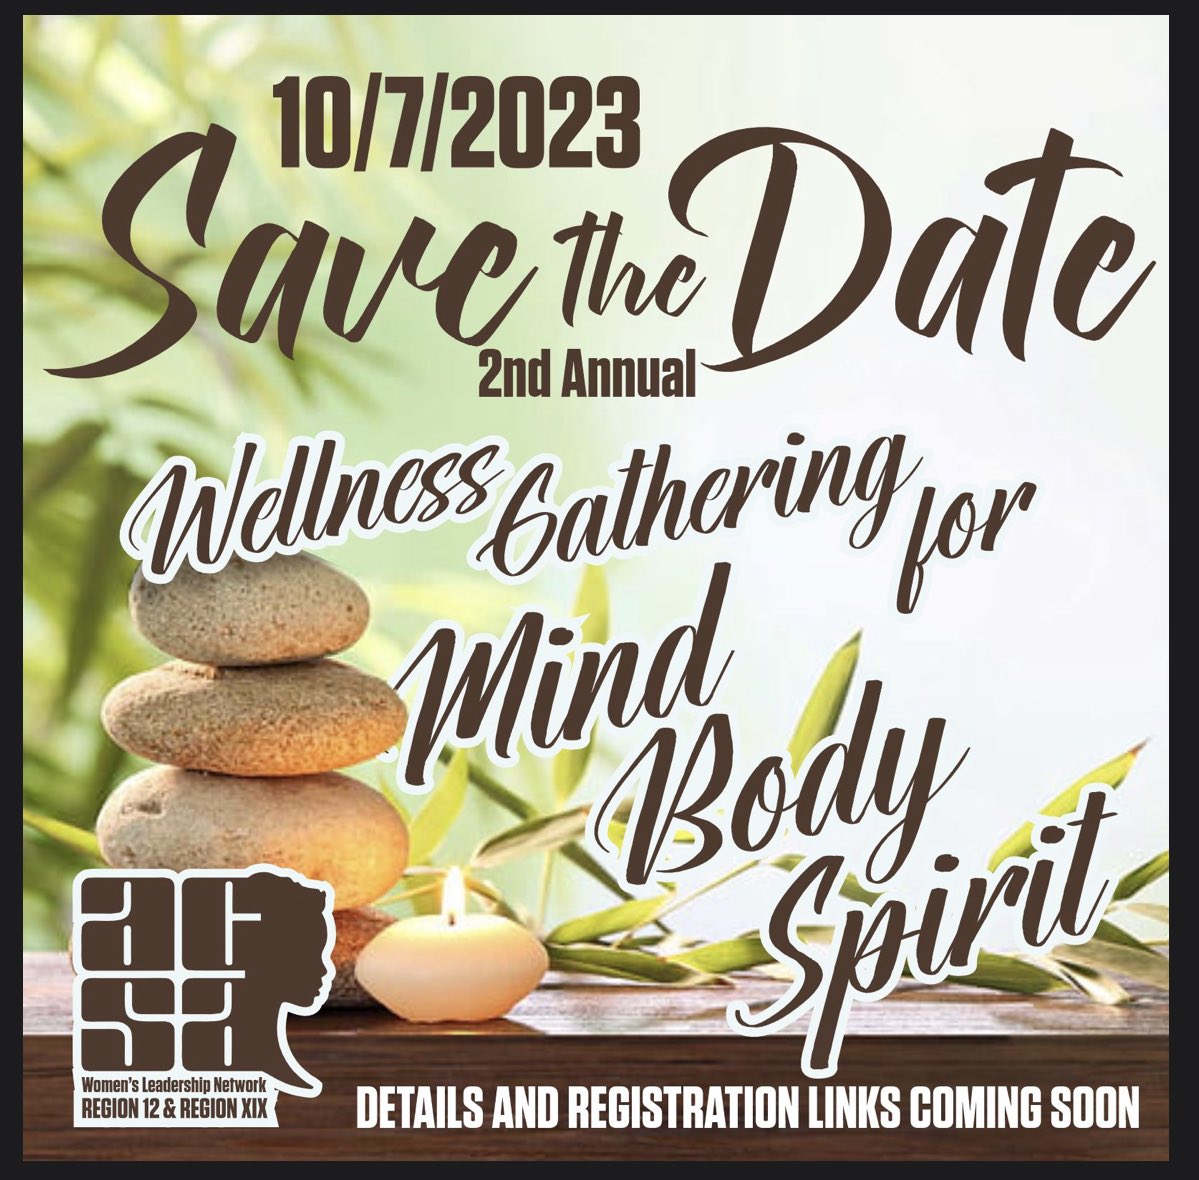 SAVE THE DATE Registration details coming soon free #WLNstrong opportunity! 💙 @mollylarge @ProfeMsVgodinez @Judy_Servin @SMHS_CJUSD @lynettewsocial @tcauseybush @AllieKay7 @DrAmyNH @DrBomentre @DrJBourgeois @FUSD_Supt @JulioAntoinette @DrSonal_EDU @SabineRPhillips @calibinks1